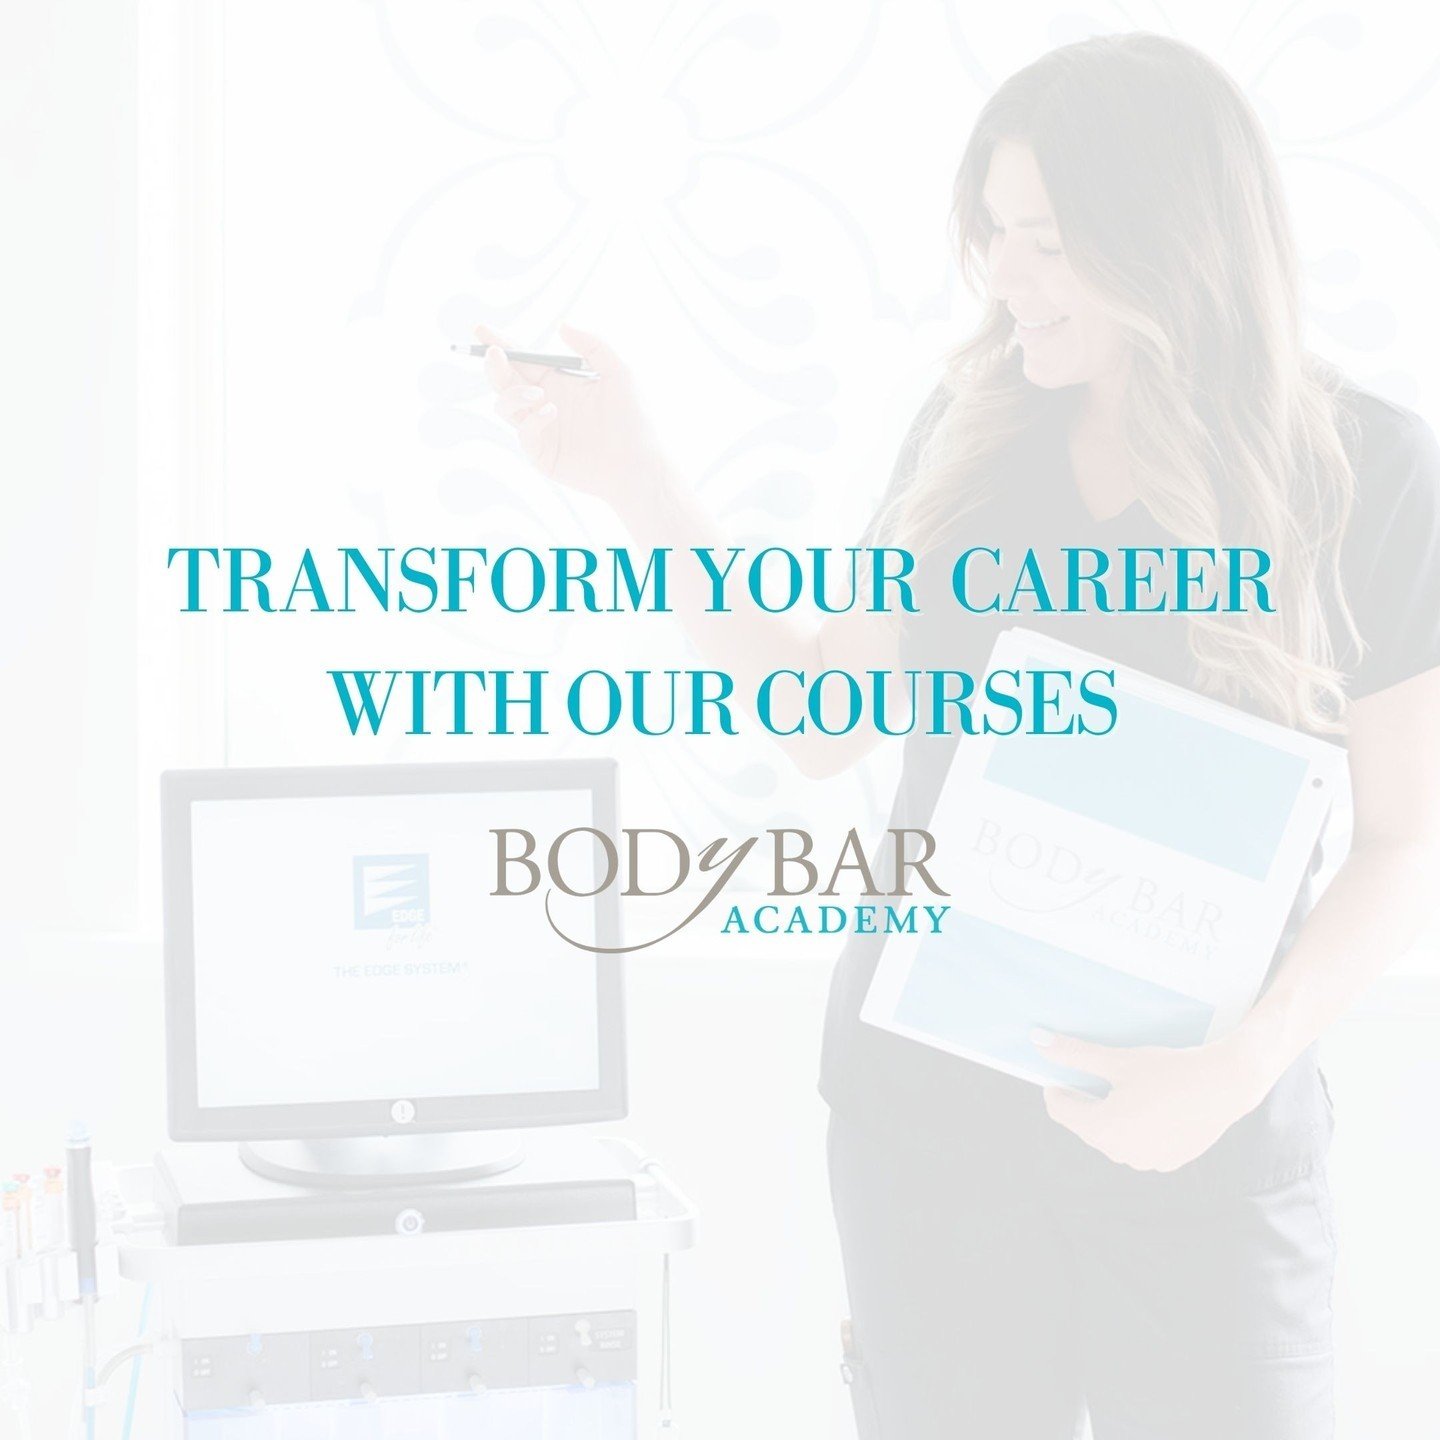 Transform Your Career with Body Bar Academy Courses⁠
⁠
Discover exciting opportunities in the beauty and medical aesthetics industry with our comprehensive training programs. Whether you're looking to specialize or expand your skill set, Body Bar Aca